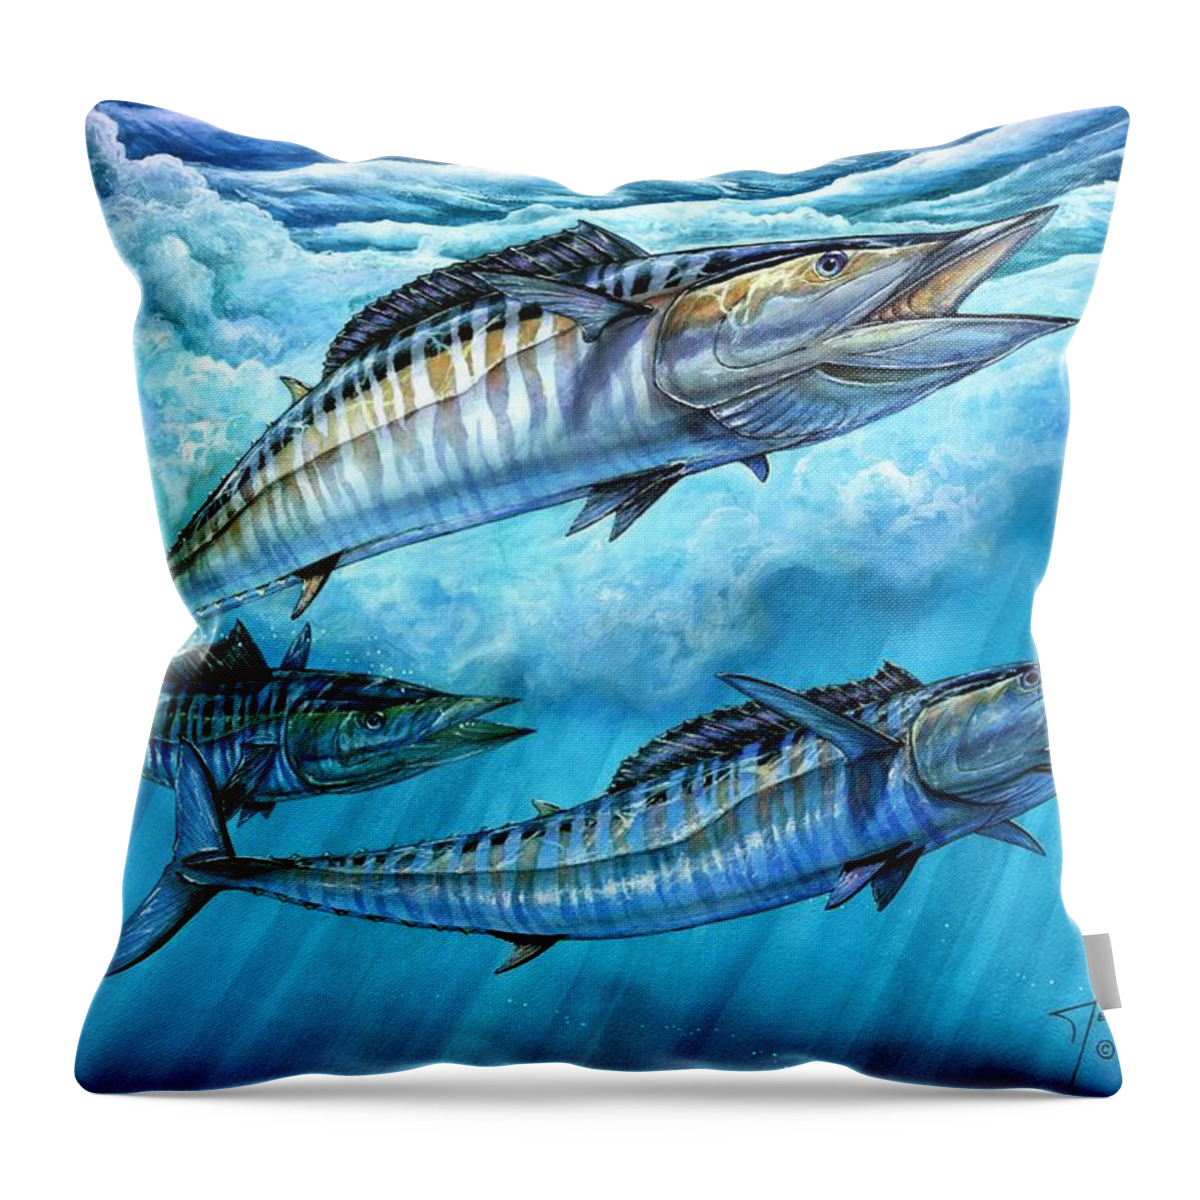 Wahoo Throw Pillow featuring the painting Wahoo In Freedom by Terry Fox